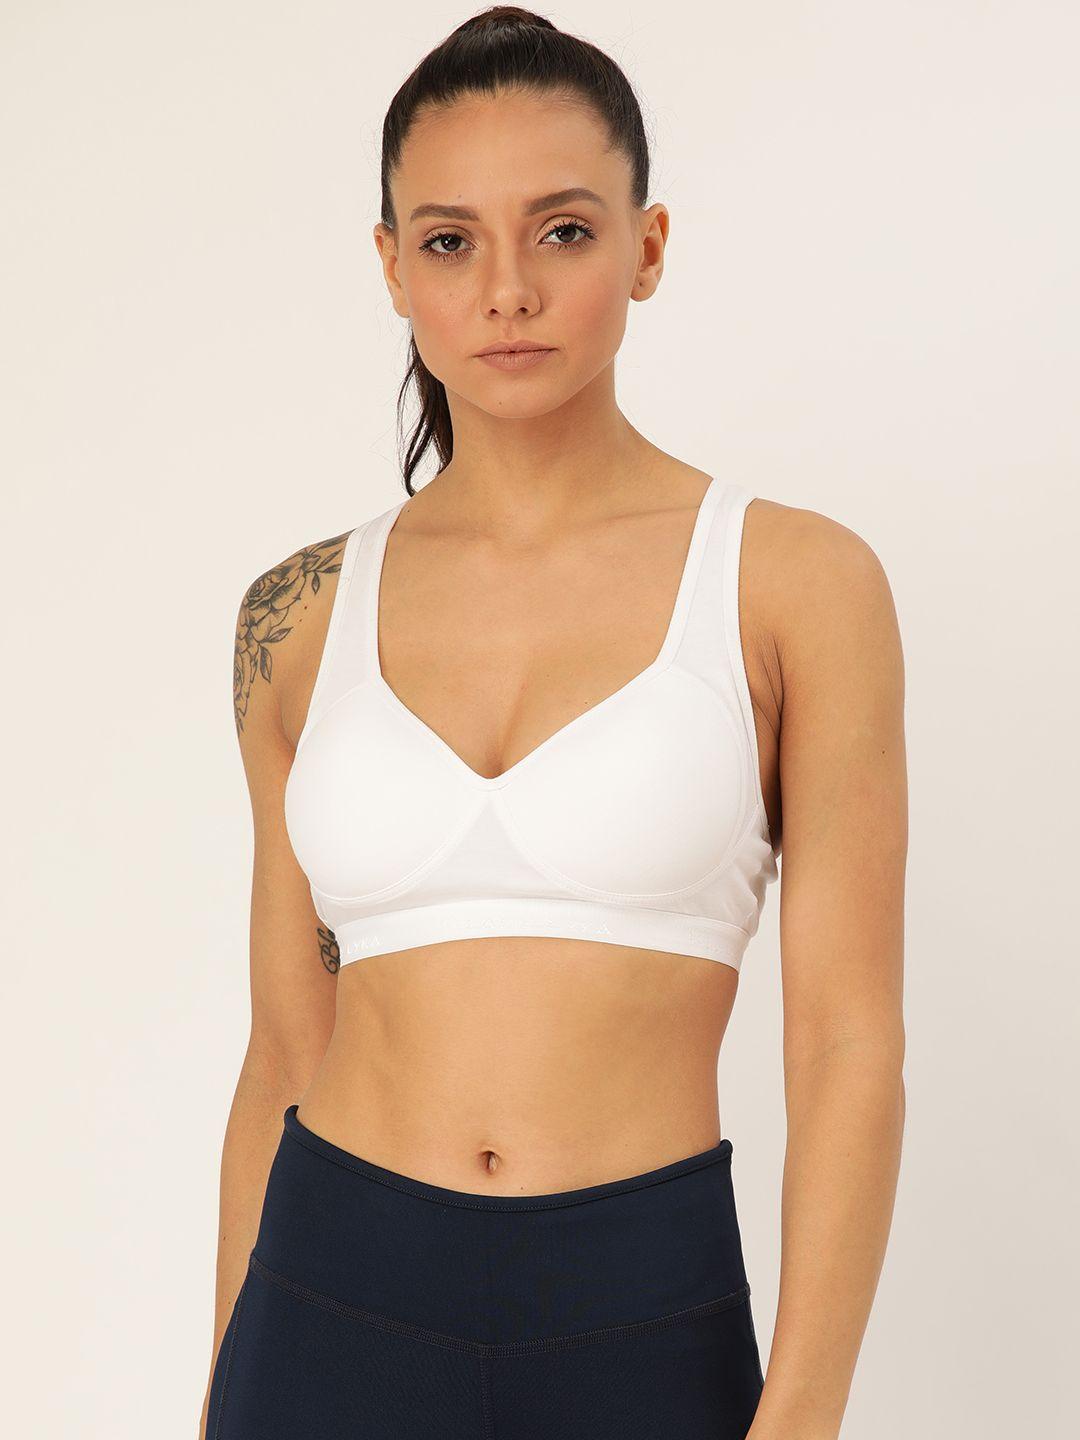 lady-lyka-white-solid-non-wired-lightly-padded-sports-bra-provogue